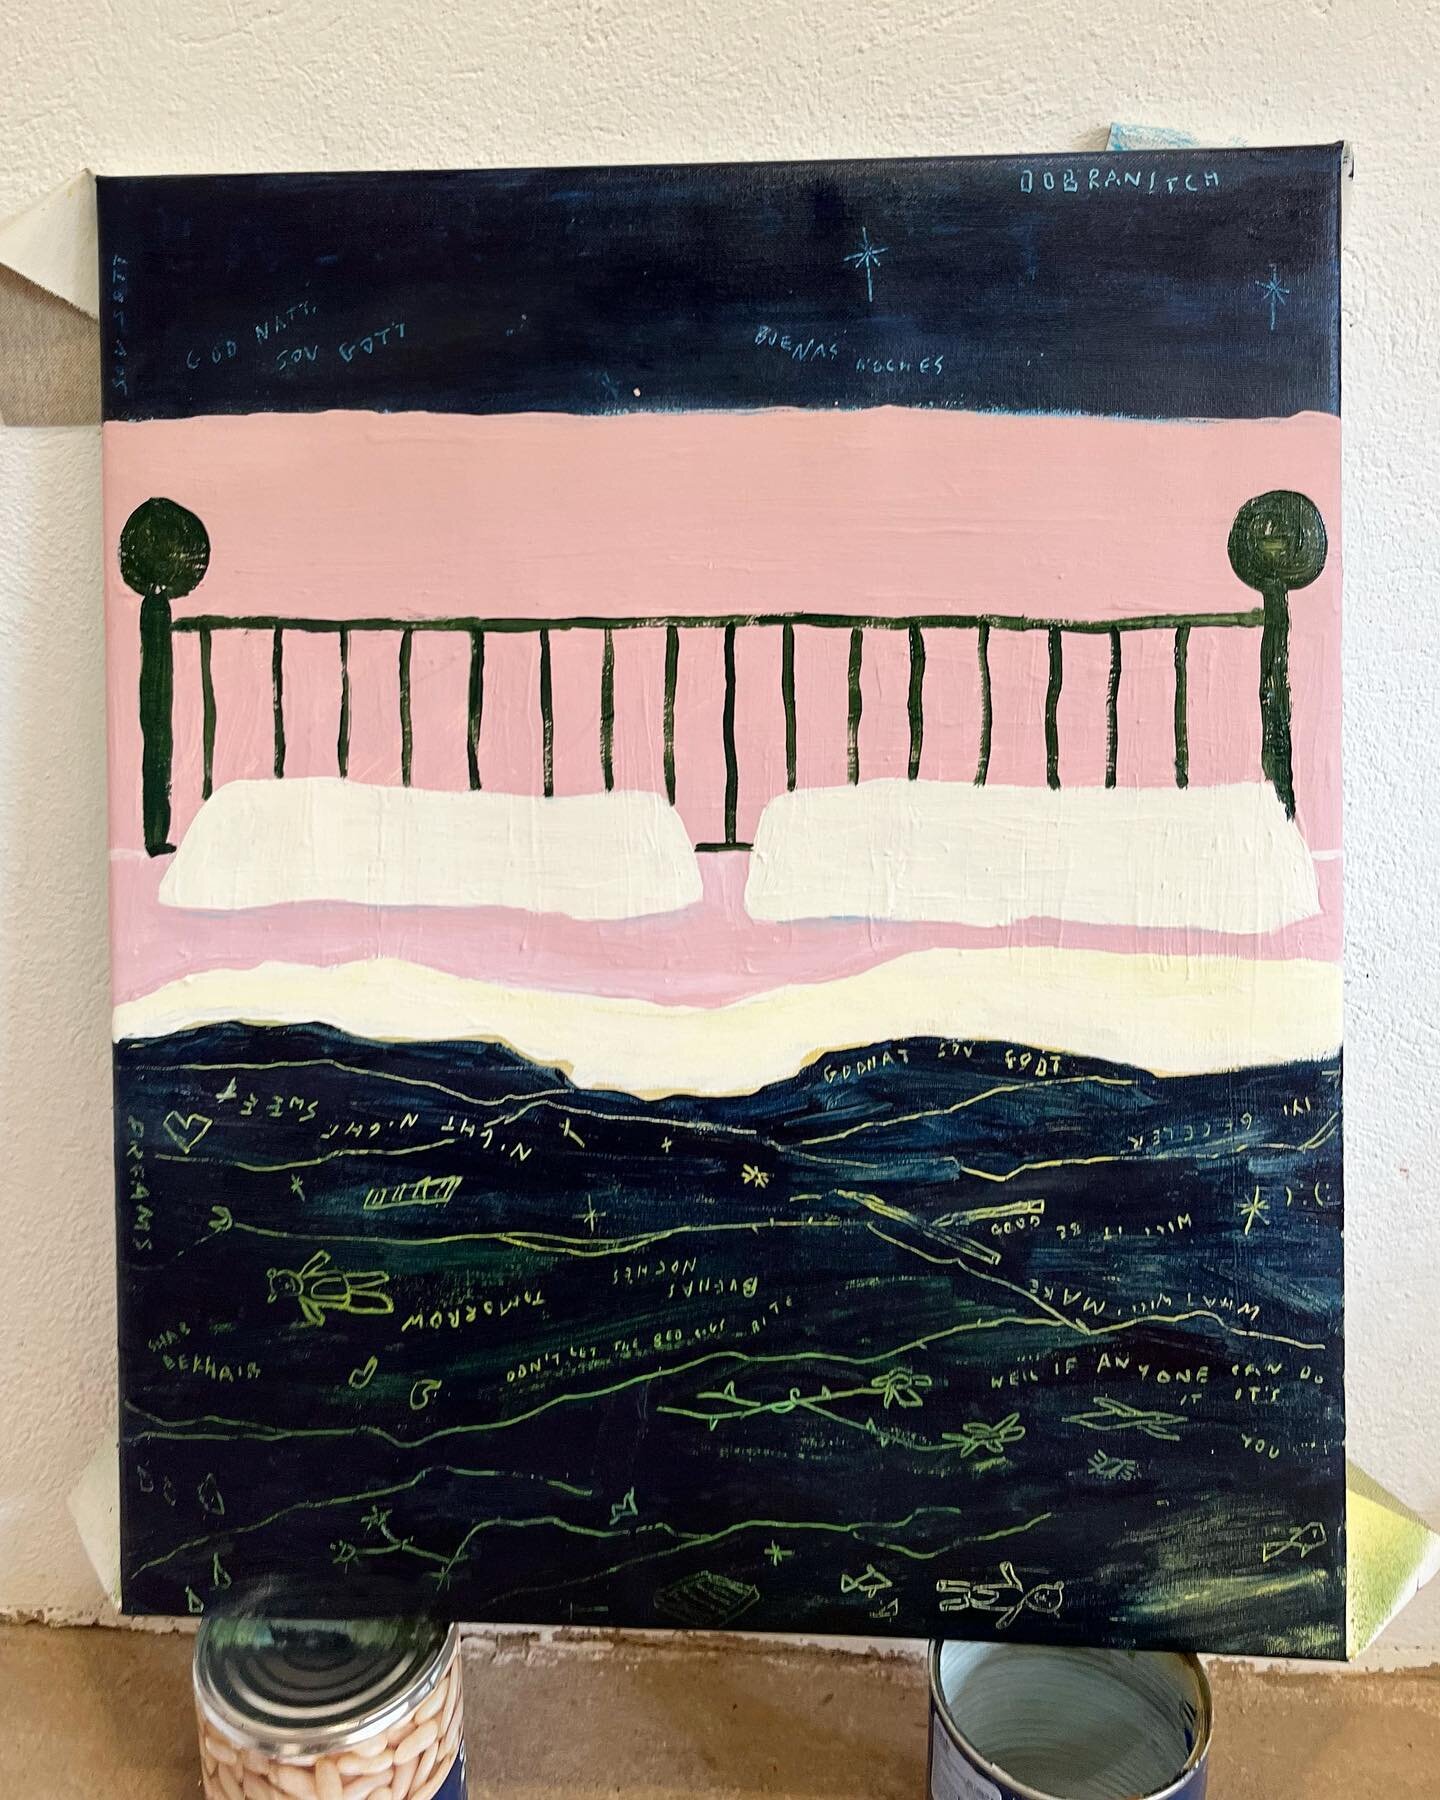 The first painting I did at @casa.balandra 🛏 a month with magic women. Good night greetings in different languages are etched into the paint of the bedsheets(/sea) and sky- Spanish Ukrainian Farsi Swedish Danish Turkish &amp; English. What a special